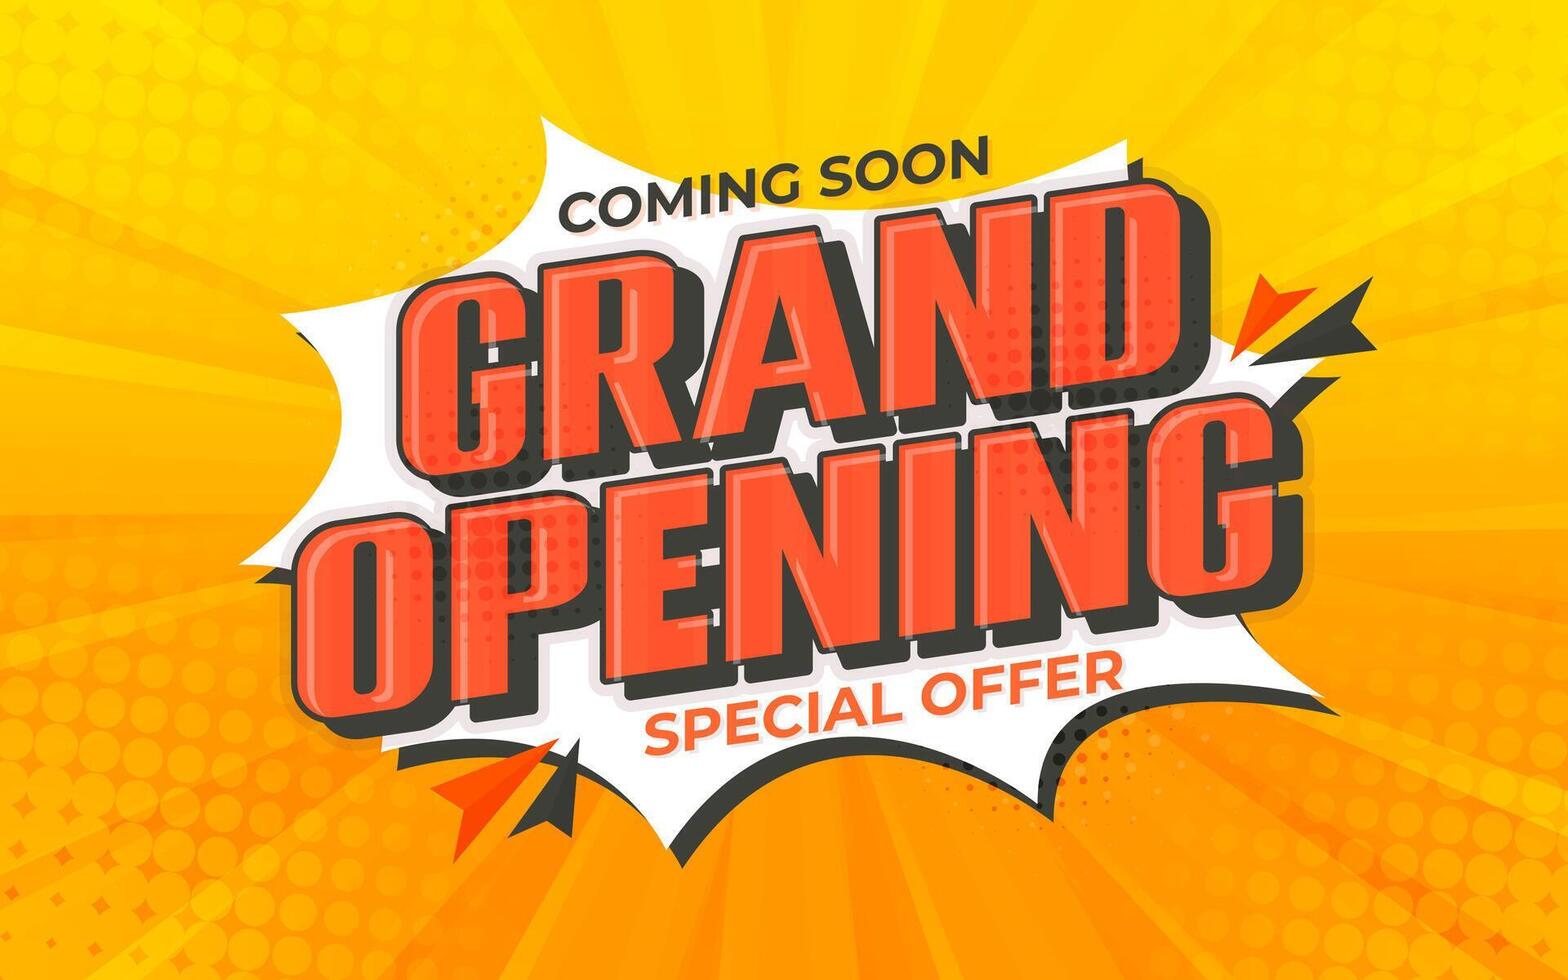 Grand opening coming soon sale banner design Sale promotion template with 3d text effect sale poster. vector